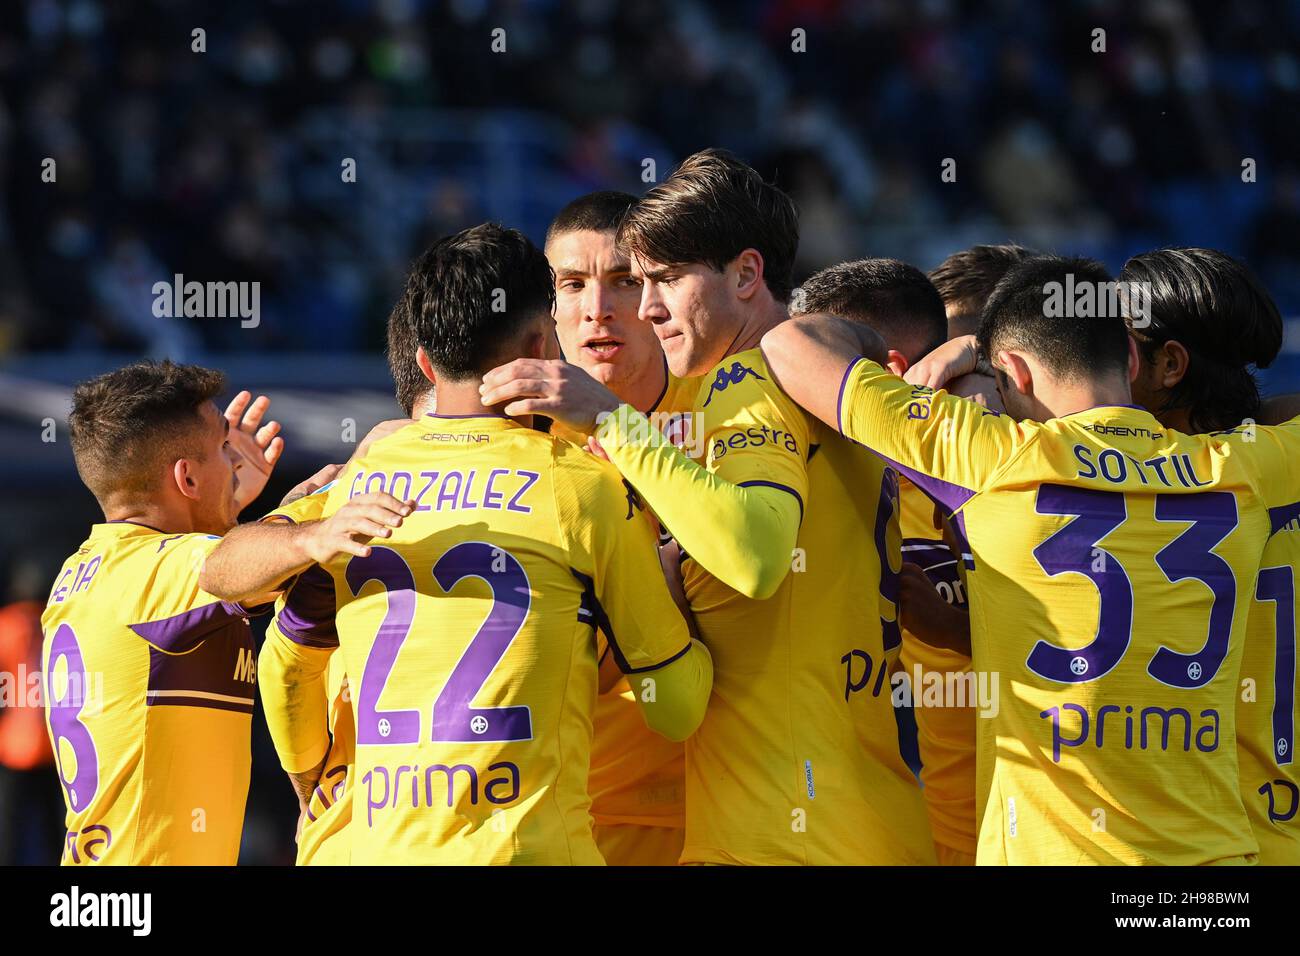 Bologna, Italy. 05th Dec, 2021. Fiorentina Team celebrating Dusan Vloahovic after his goal during Bologna FC vs ACF Fiorentina, italian soccer Serie A match in Bologna, Italy, December 05 2021 Credit: Independent Photo Agency/Alamy Live News Stock Photo